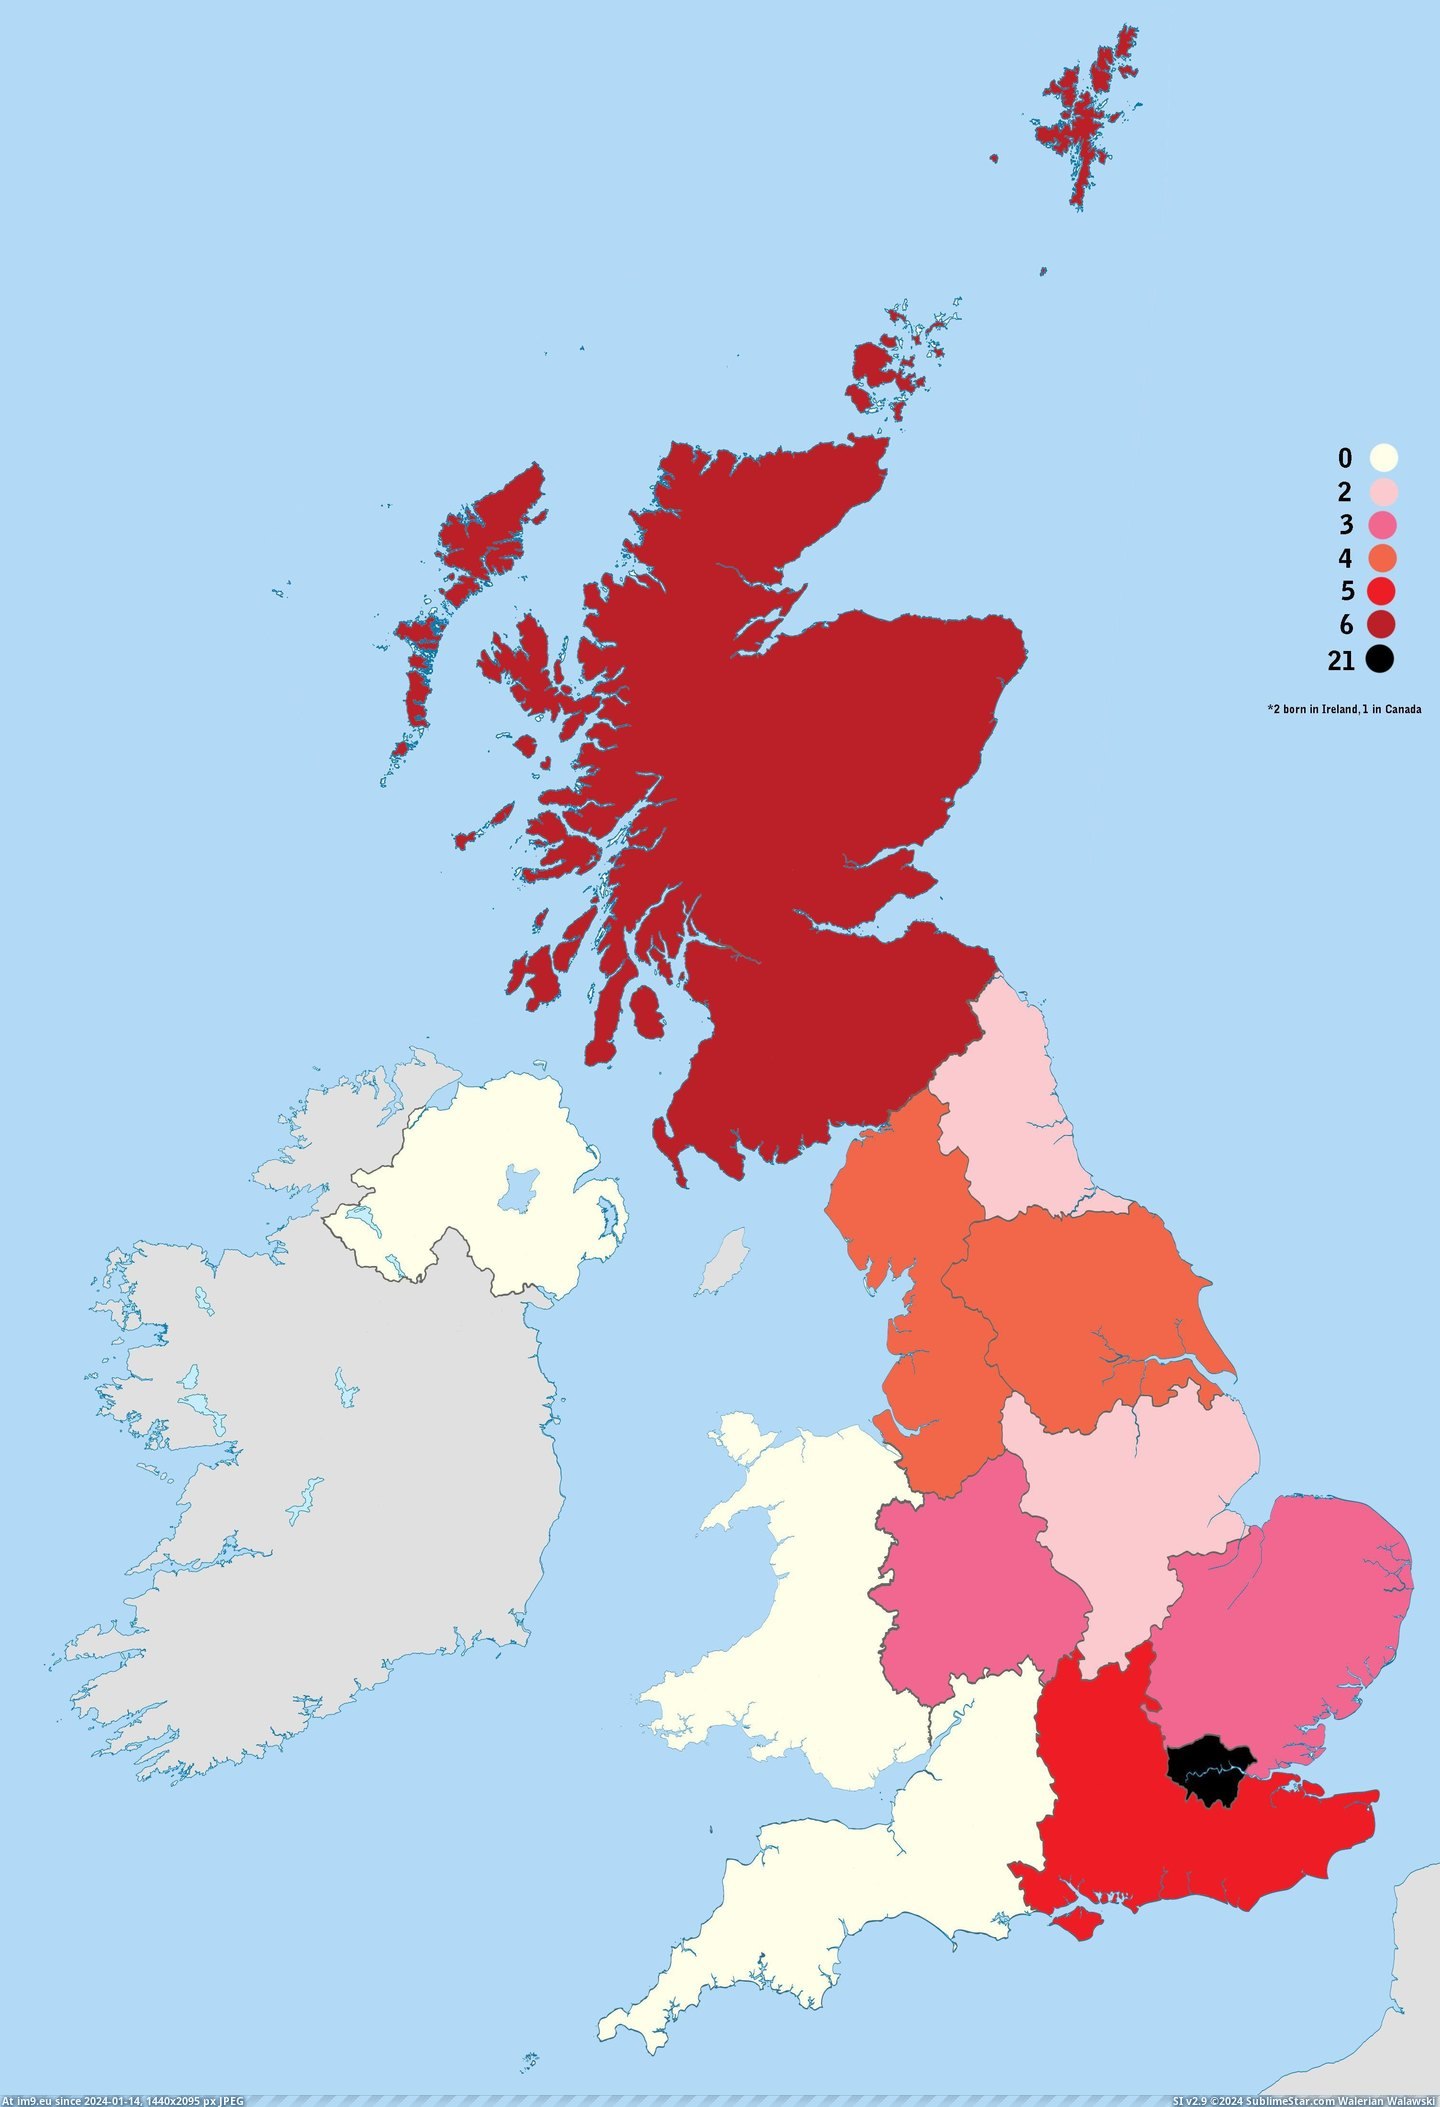 #British #Number #Regions #Ministers #Born #Prime [Mapporn] UK regions by number of British Prime Ministers born in each [3011x4392] [OC] Pic. (Image of album My r/MAPS favs))